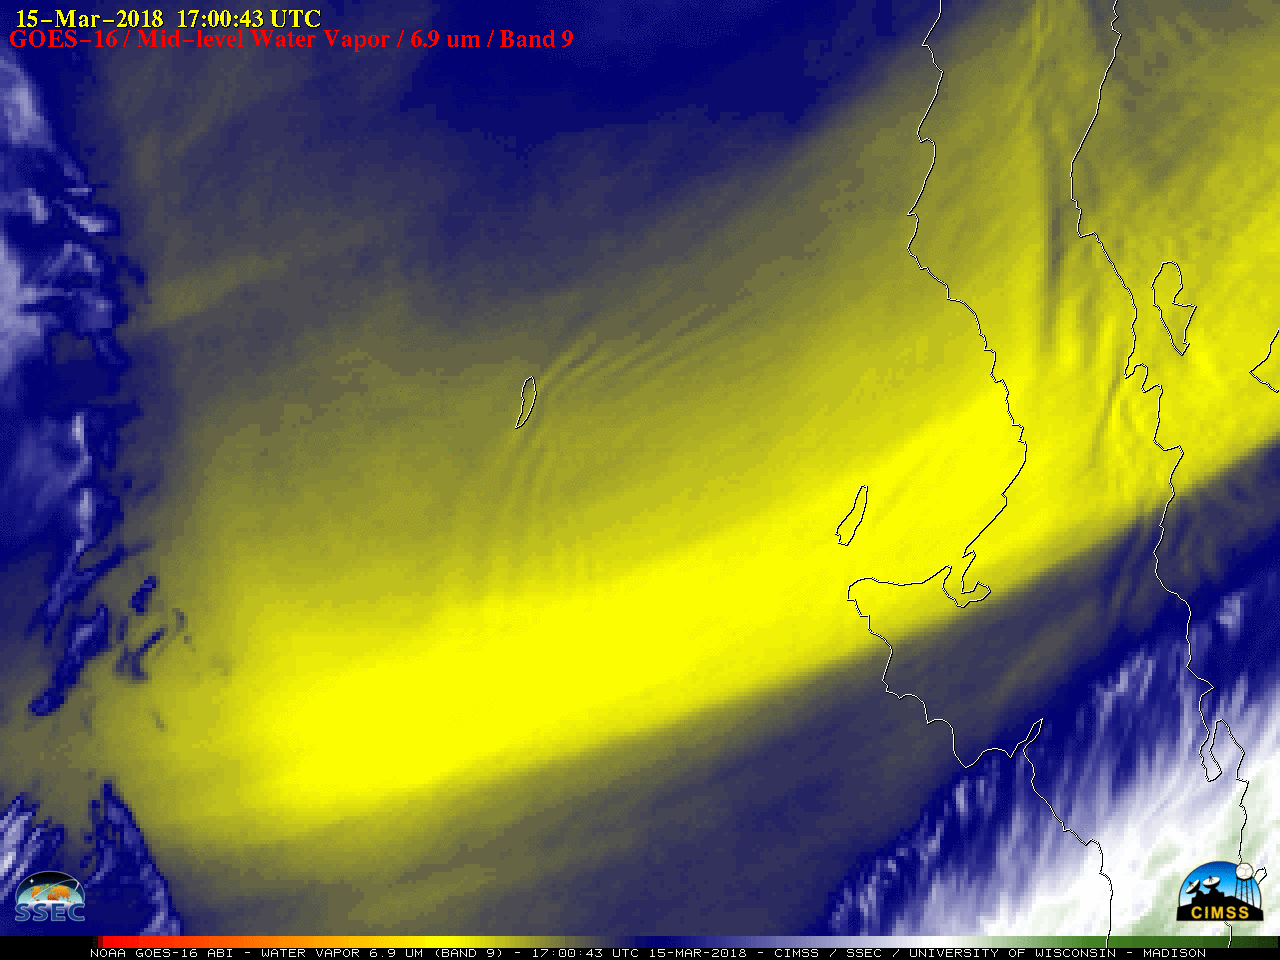 GOES-16 Mid-level (6.9 µm) Water Vapor images [click to play animation]